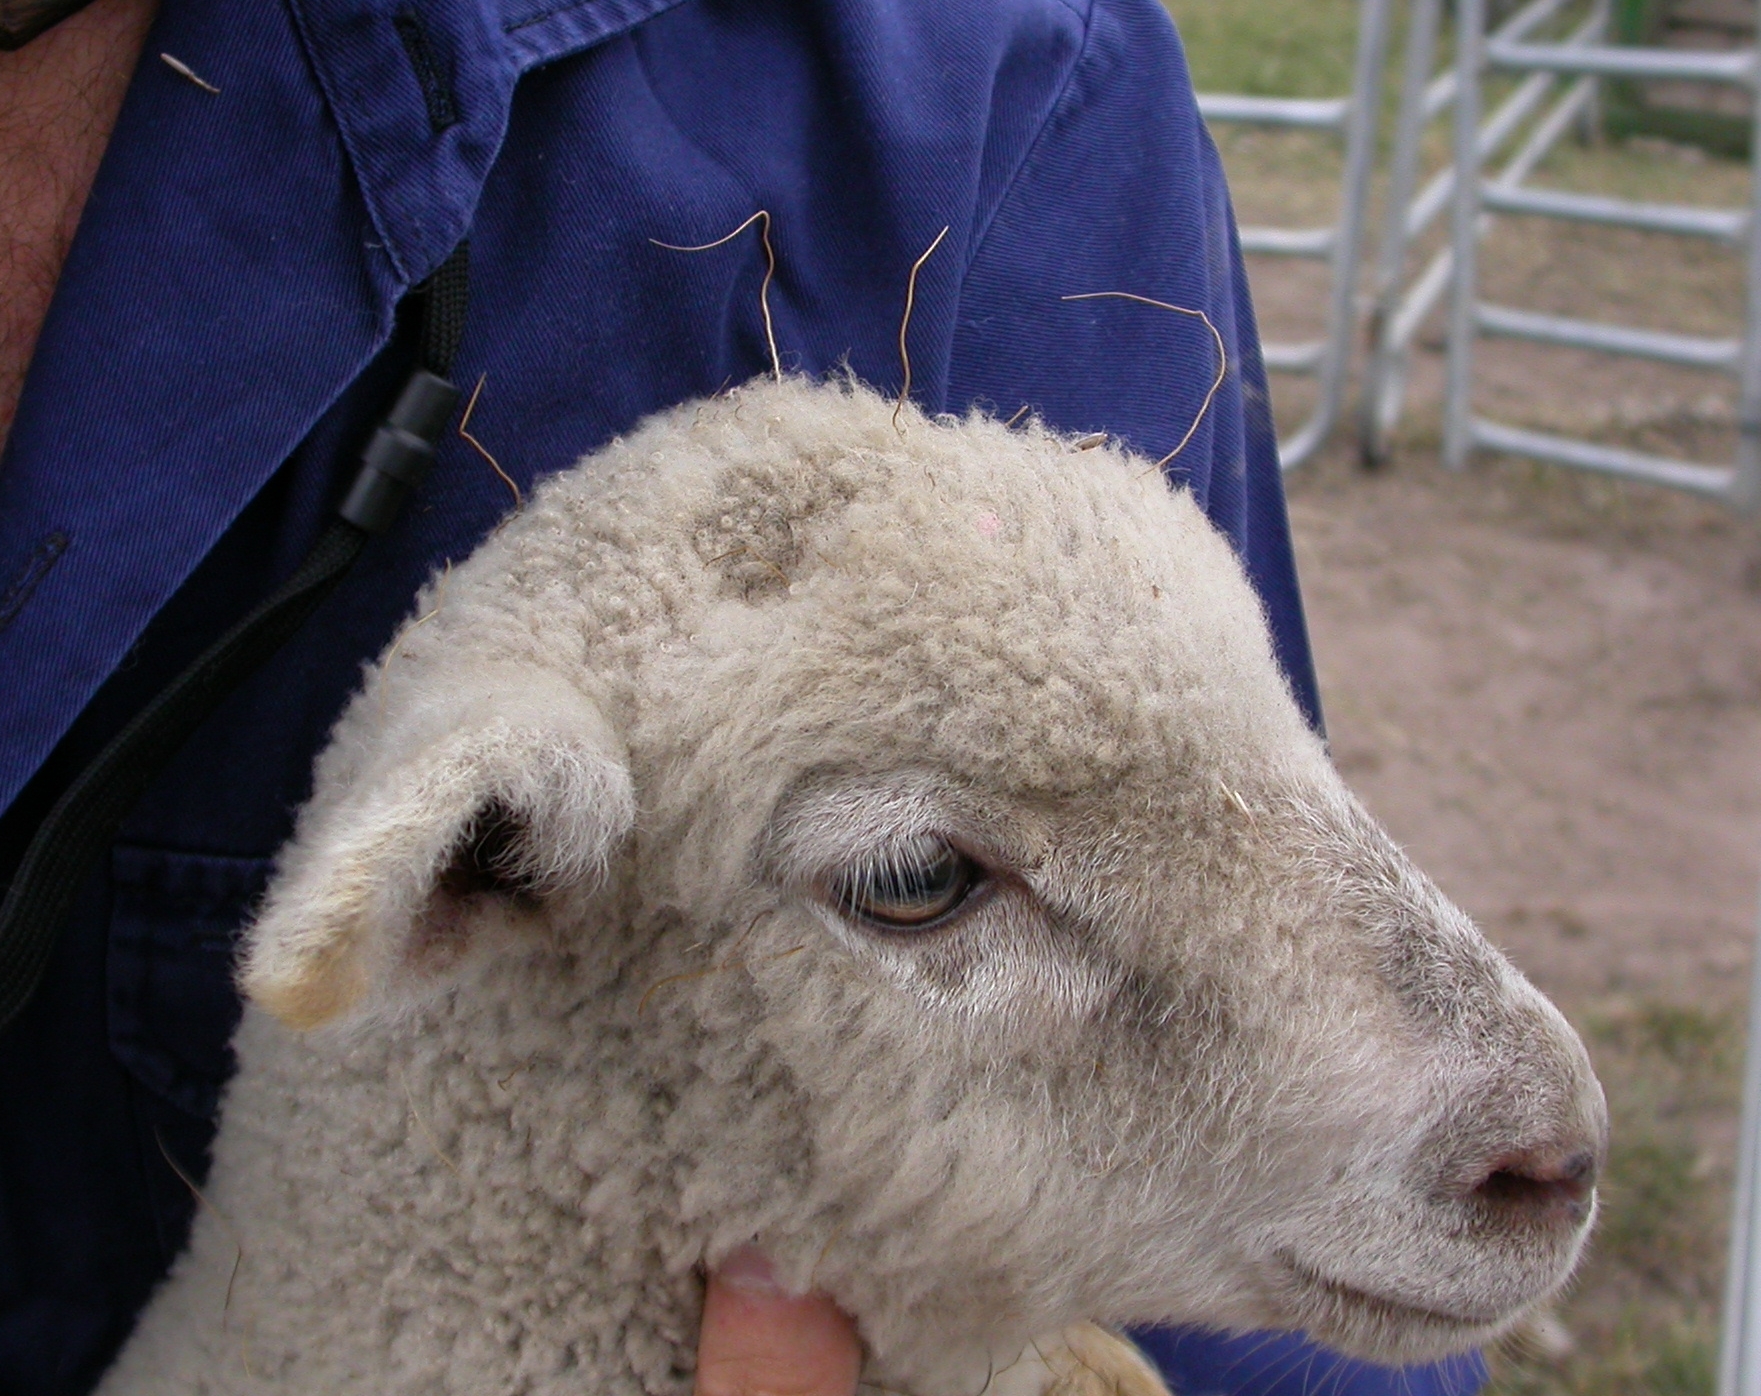 You can see the tail of the Chilean needle grass seed attached to the lamb head